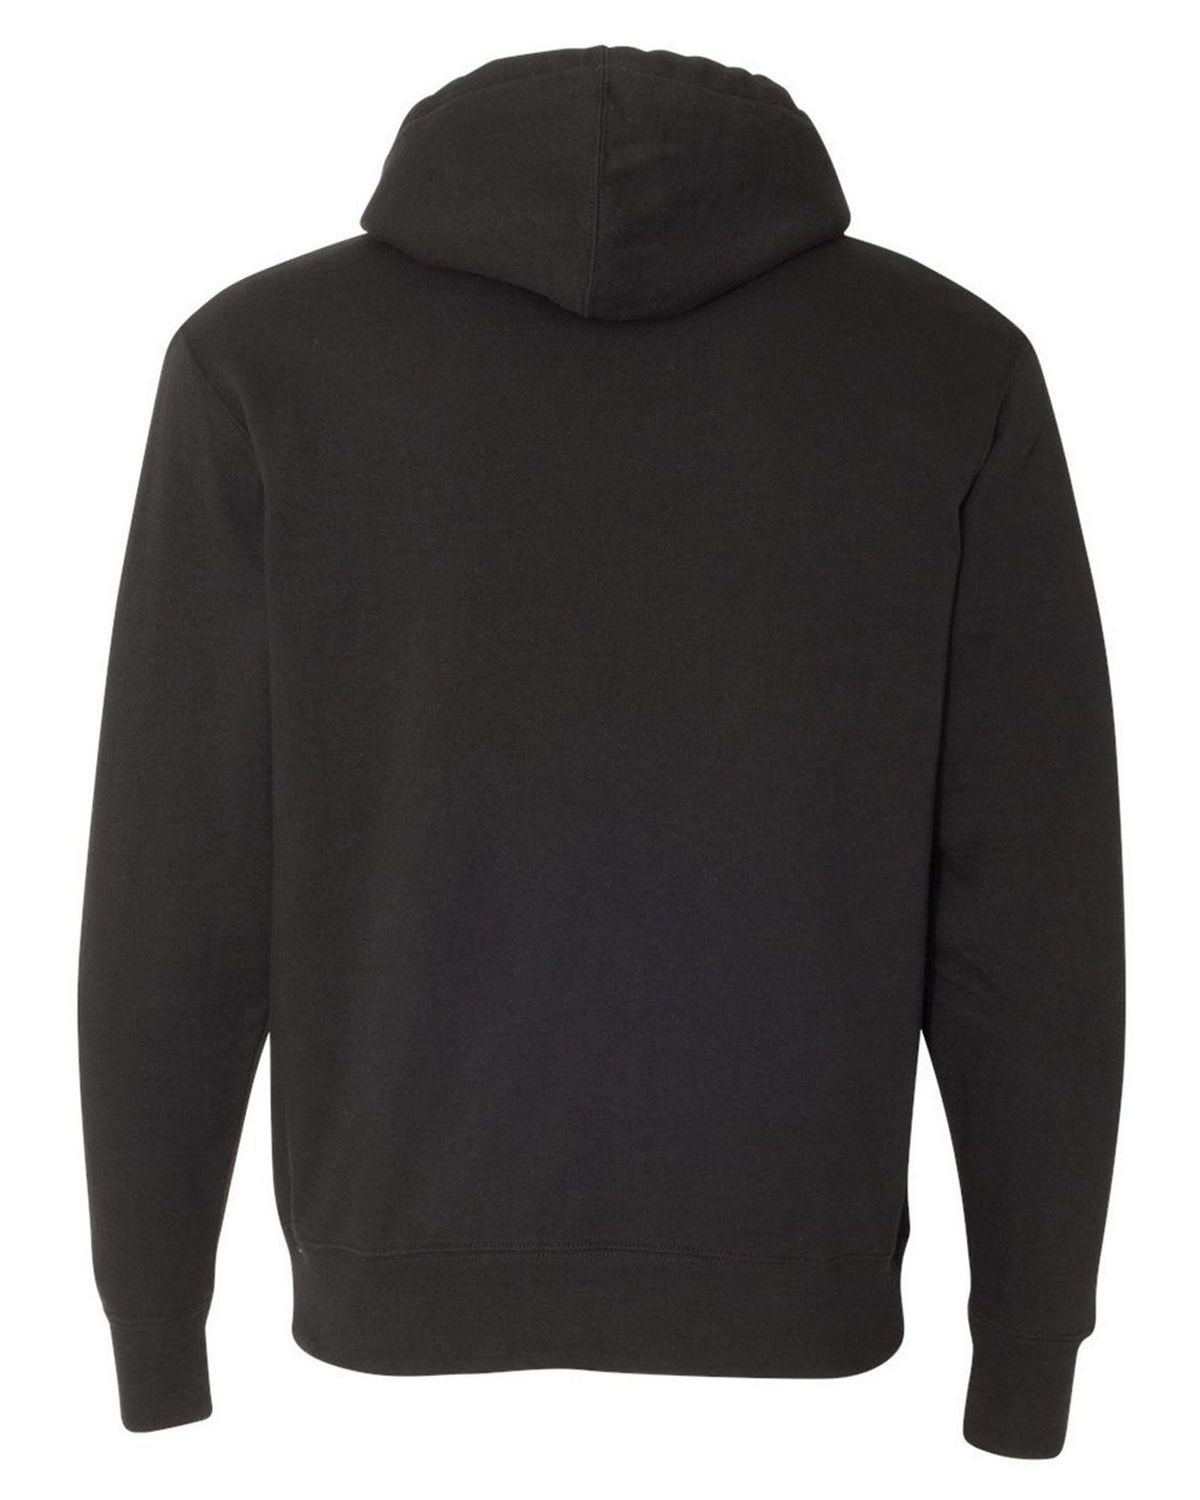 'Independent Trading Co. EXP90SHZ Unisex Sherpa-Lined Hooded Sweatshirt'